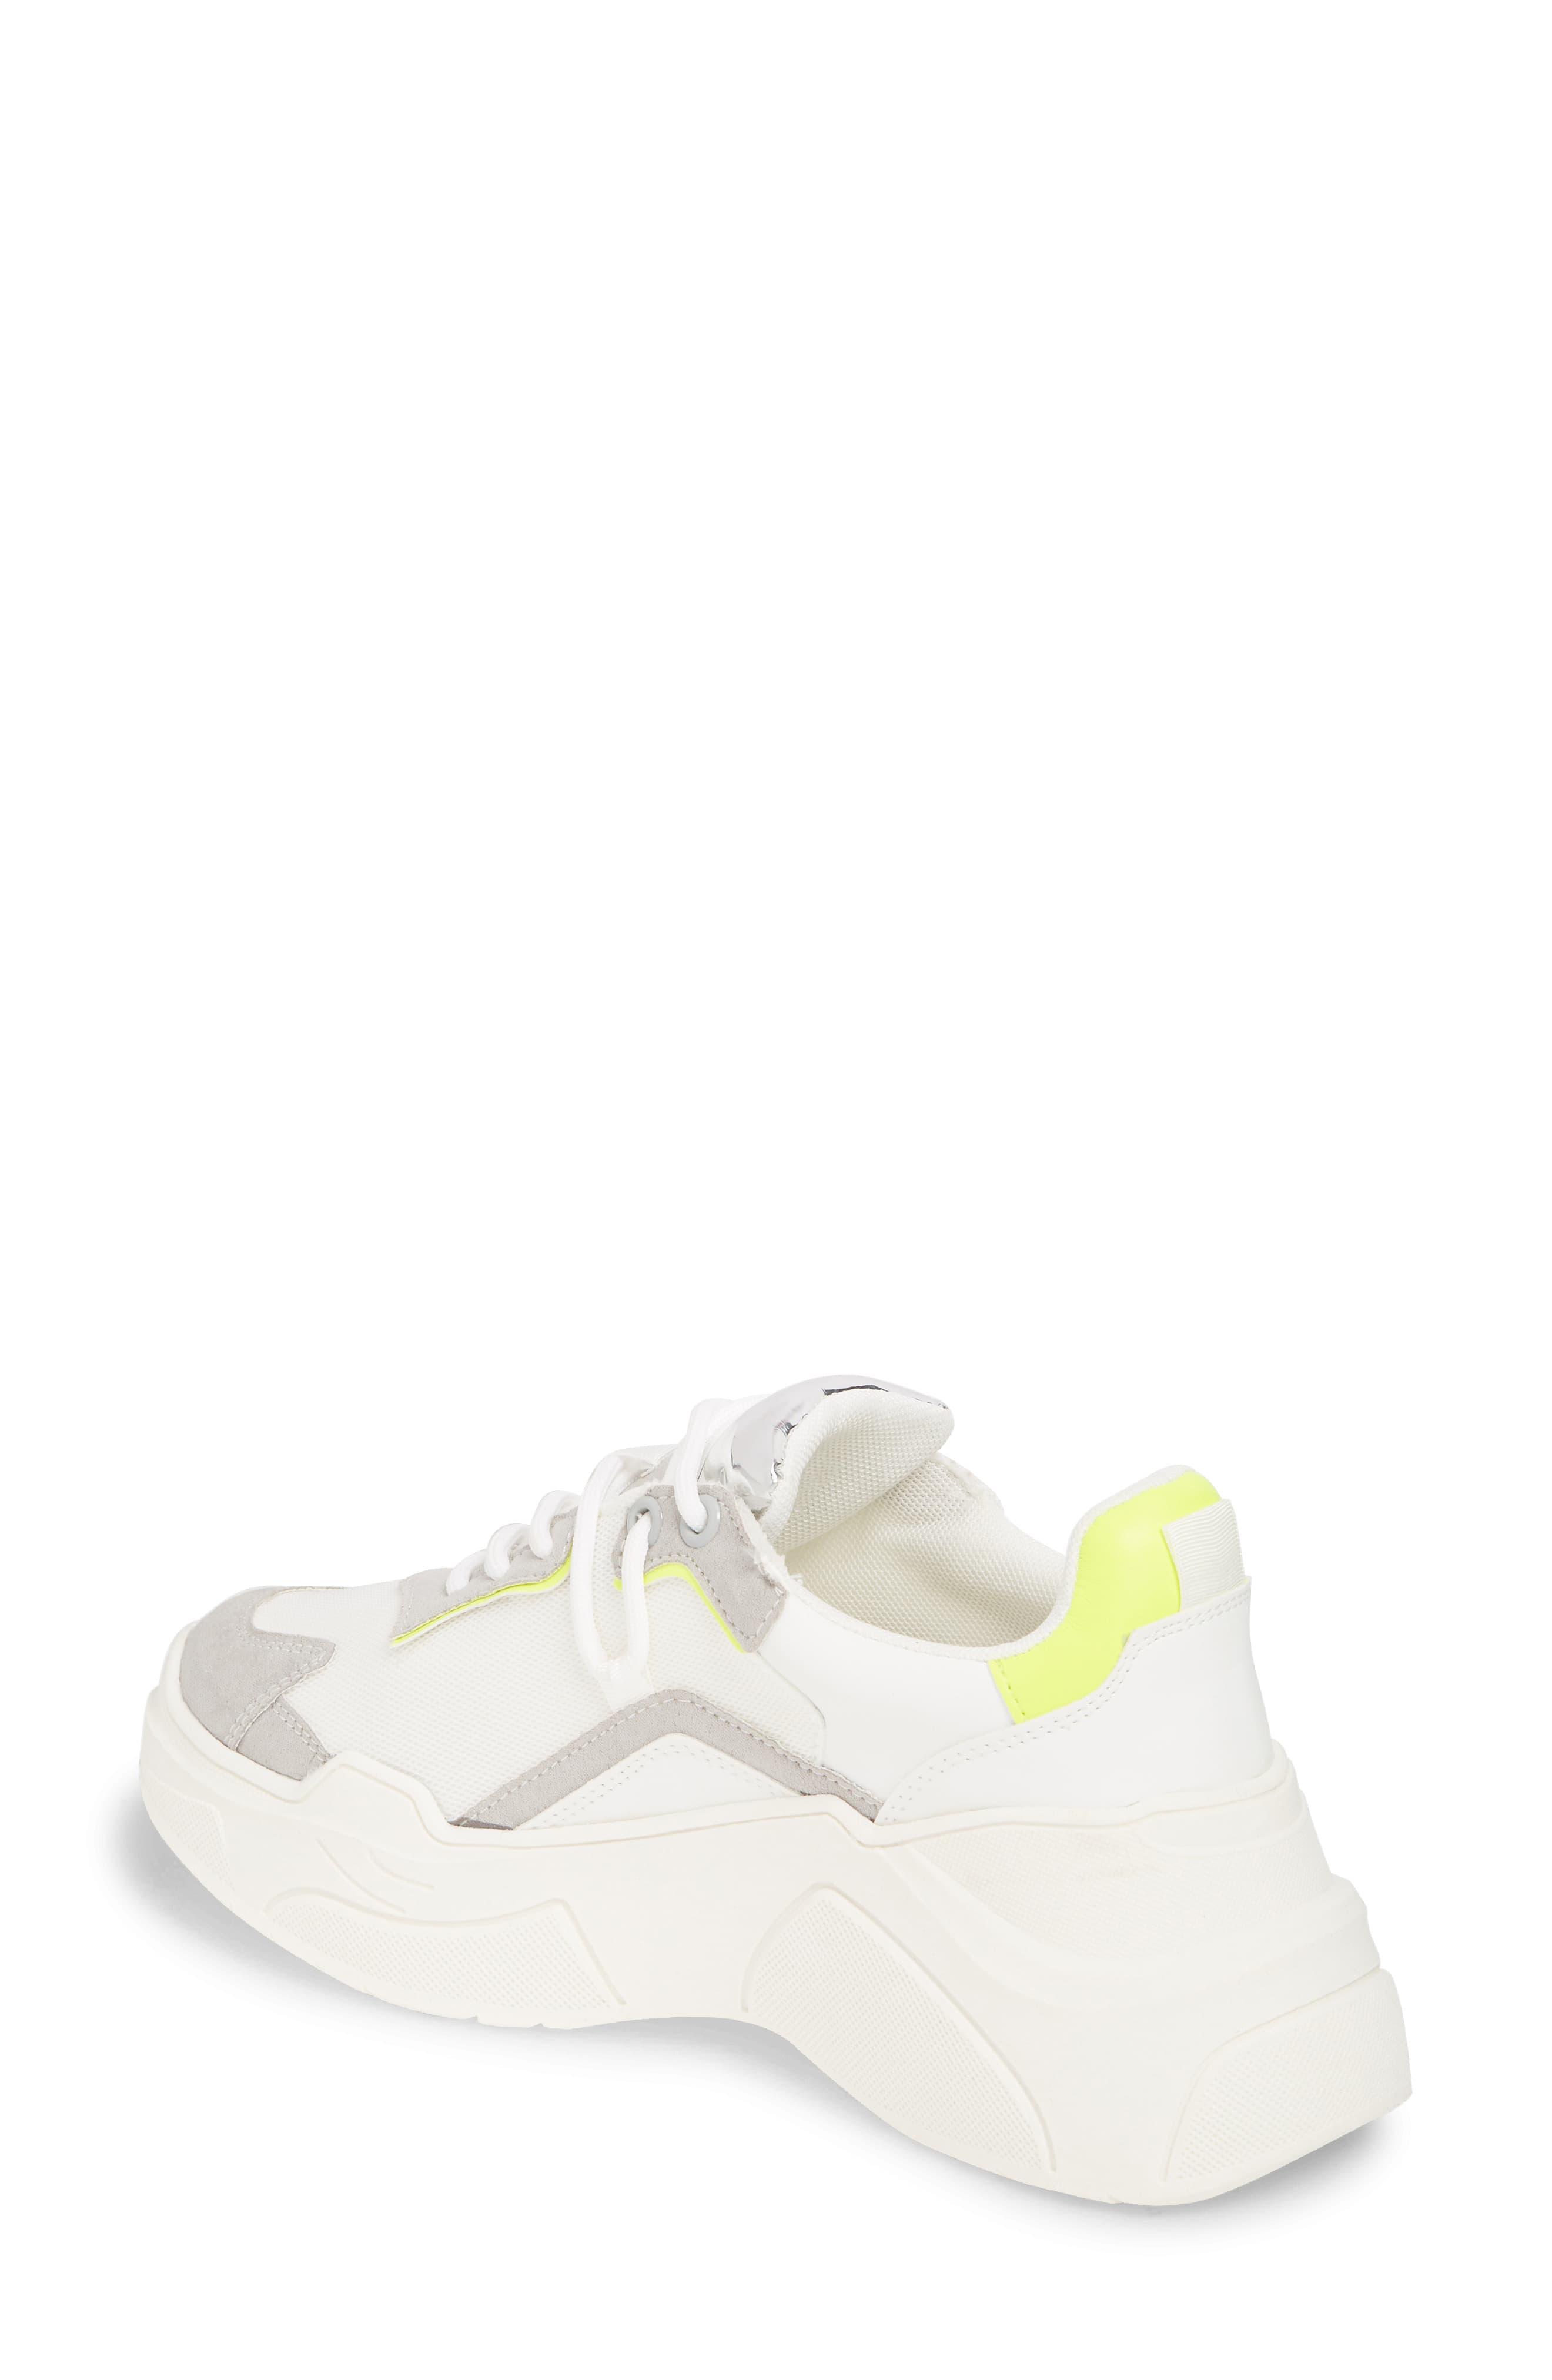 topshop chunky sneakers